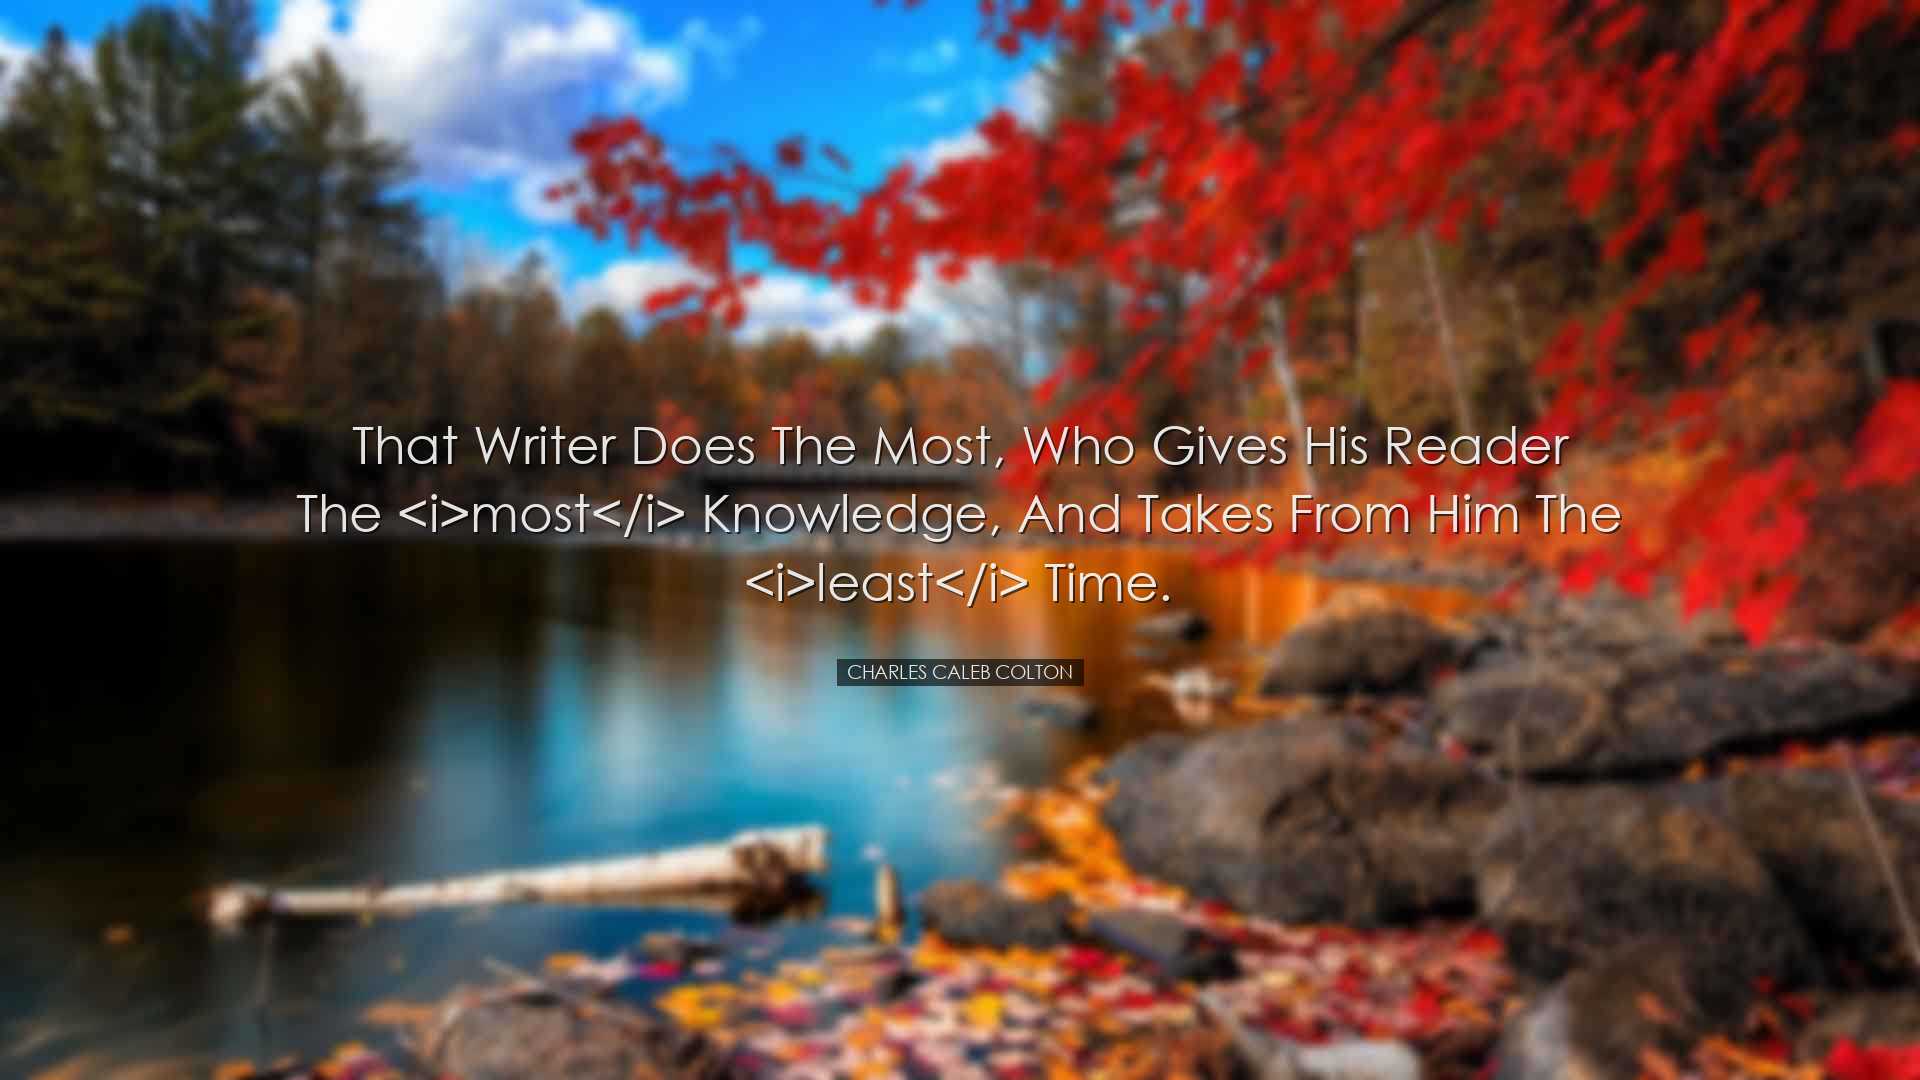 That writer does the most, who gives his reader the most kn